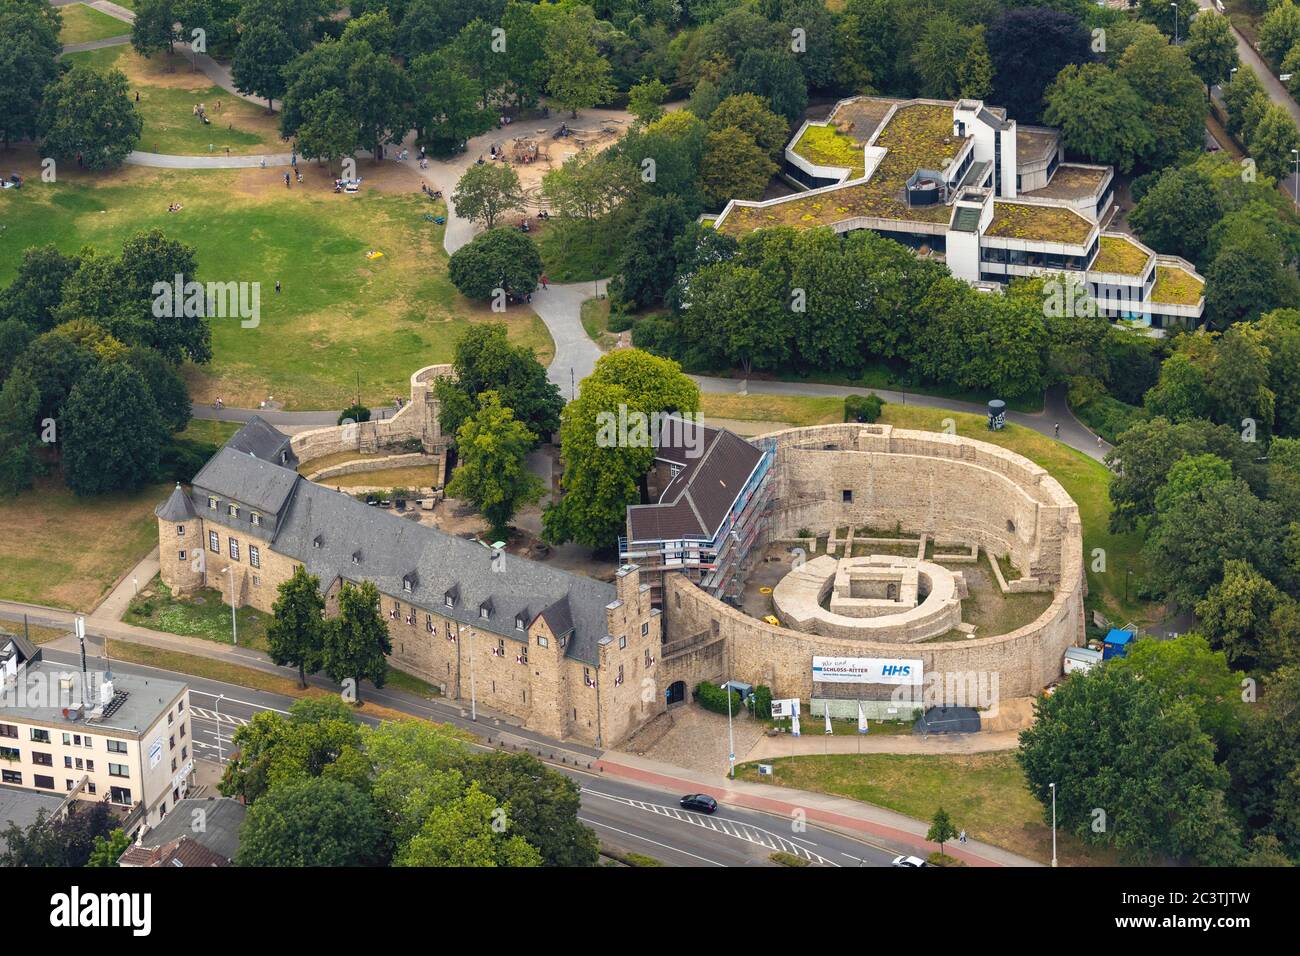 palace Broiche and old VHS building, 21.07.2019, aerial view, Germany, North Rhine-Westphalia, Ruhr Area, Muelheim/Ruhr Stock Photo